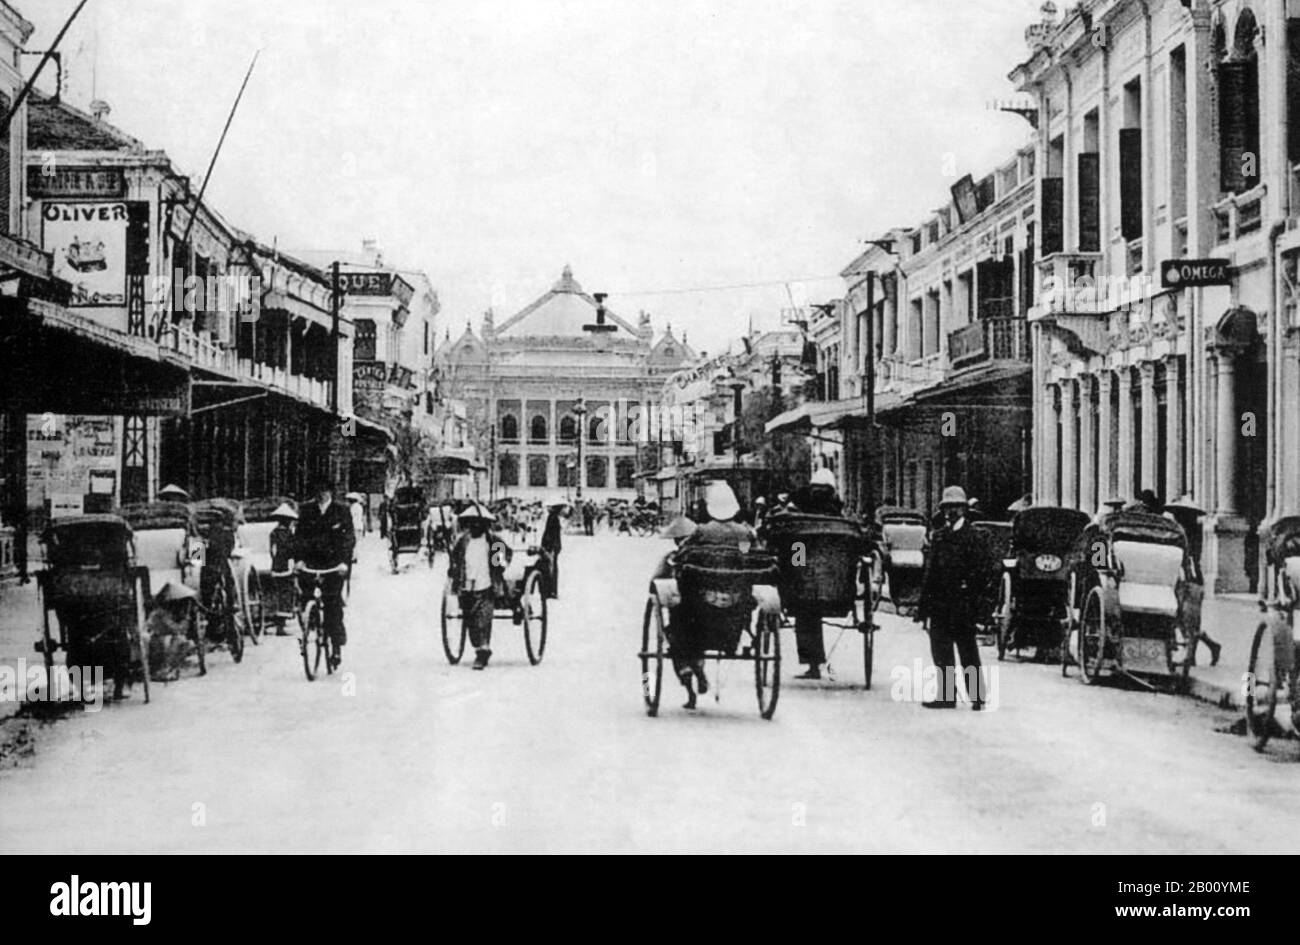 Vietnam: Trang Tien Street with the Opera House at the end, Hanoi. Photo by Pierre Dieulefils (1862-1937), early 20th century.  Erected by French colonists between 1901 and 1911, the Hanoi Opera House is considered to be a typical French colonial architectural monument in Vietnam. It is a small-scale replica of the Palais Garnier, the older of Paris's two opera houses. Stock Photo